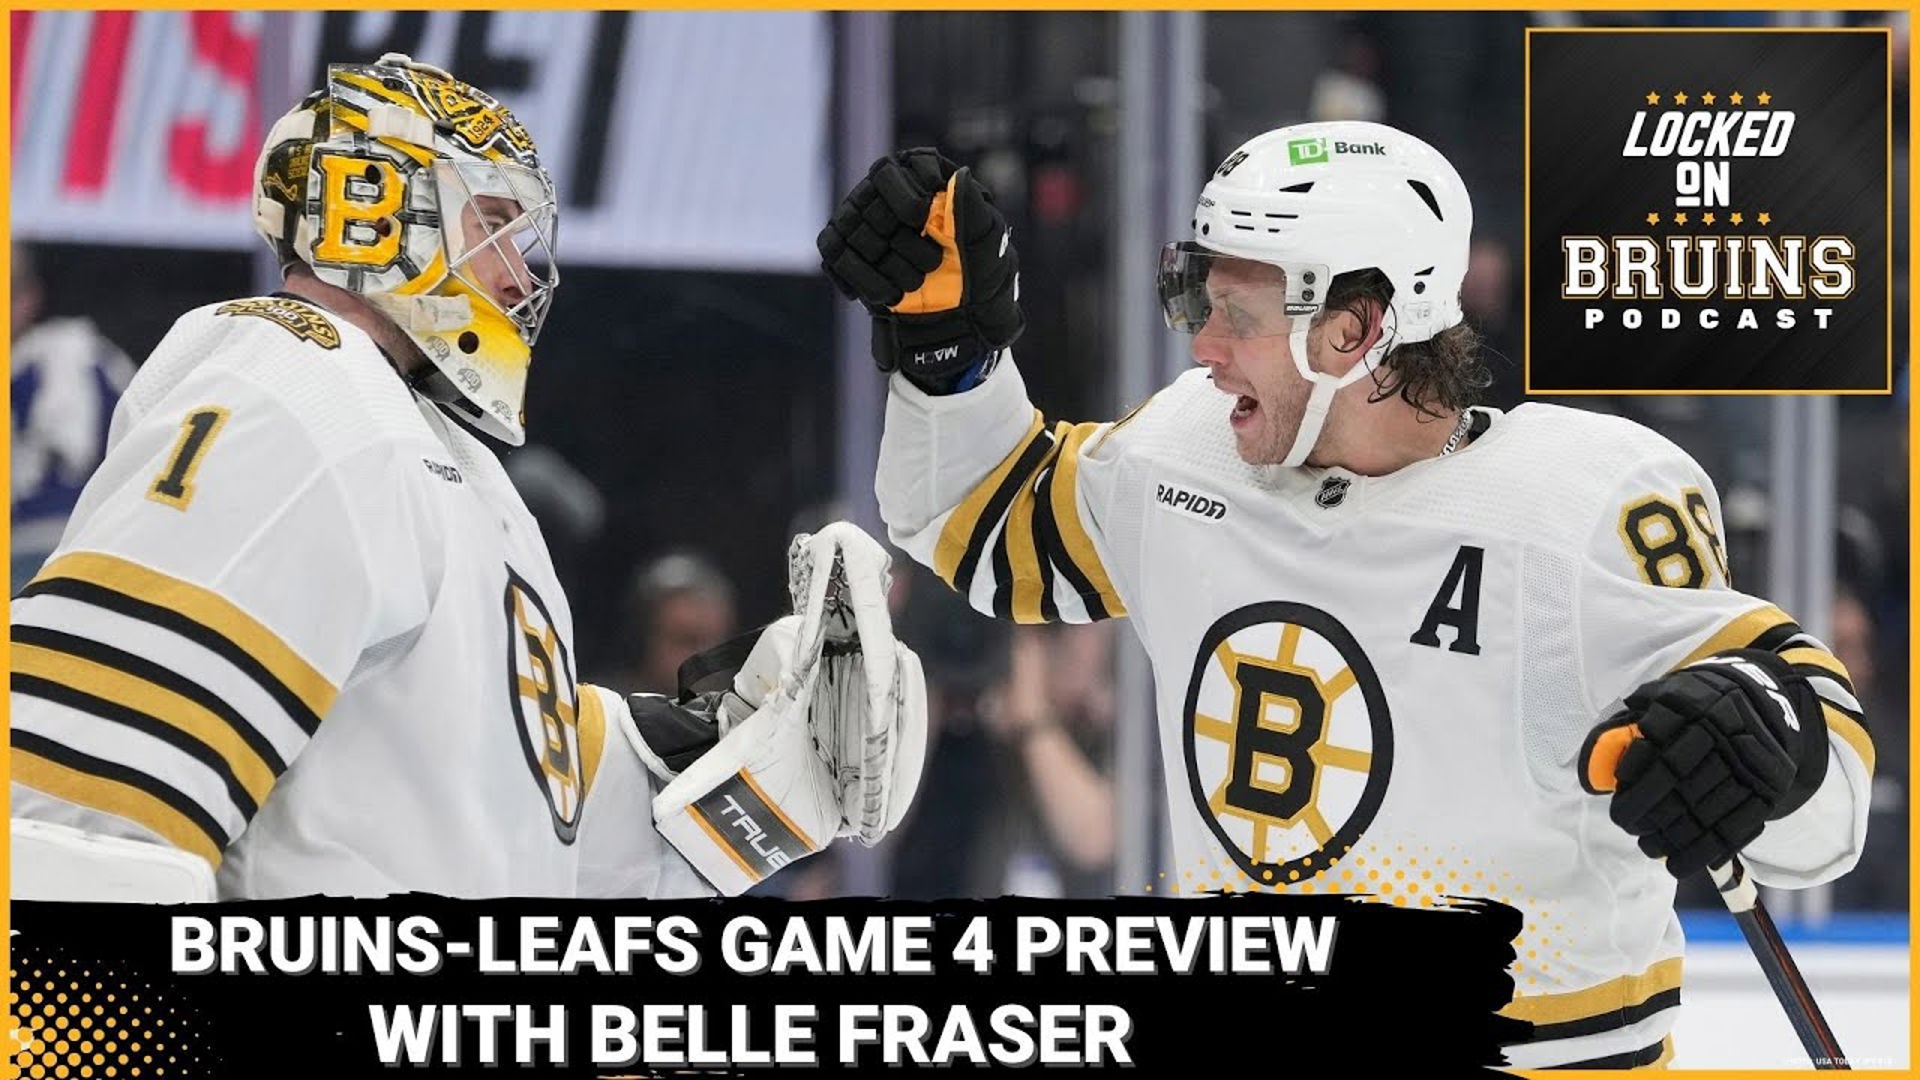 Bruins-Leafs Game 4 Preview with Belle Fraser of The Hockey News